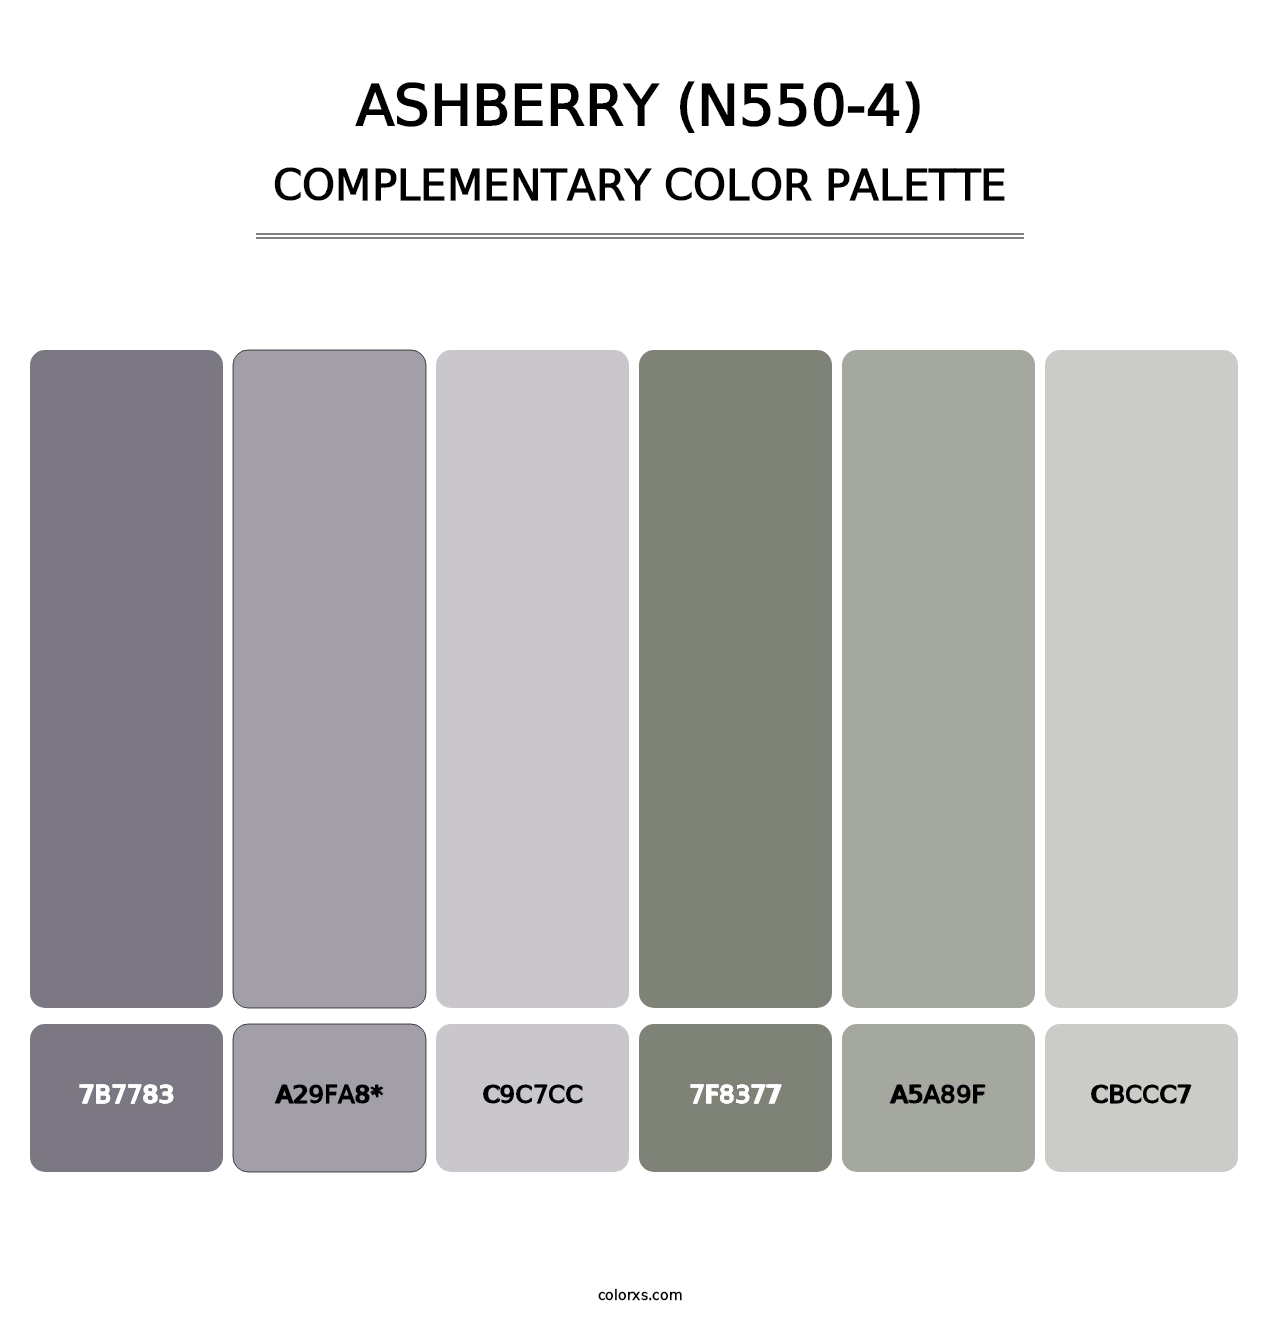 Ashberry (N550-4) - Complementary Color Palette